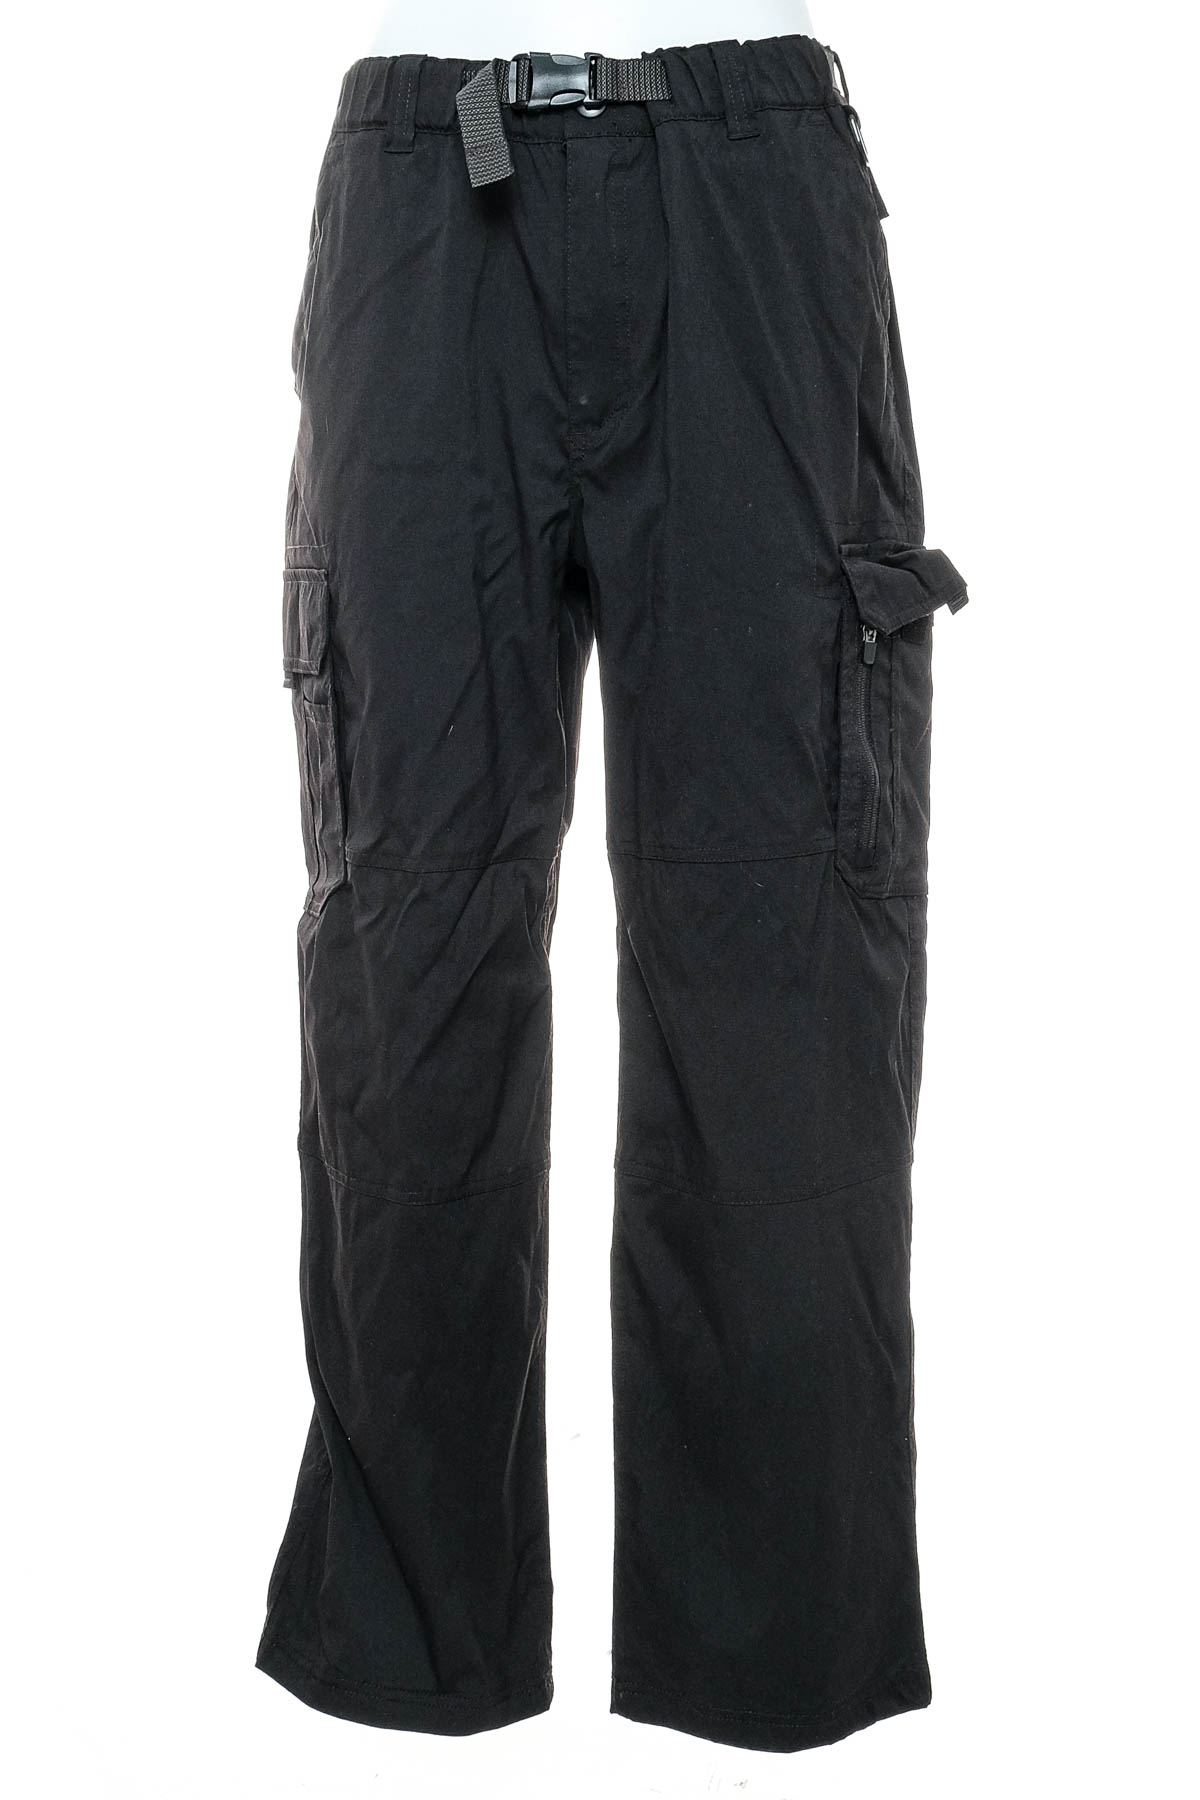 Men's trousers - BC CLOTHING - 0